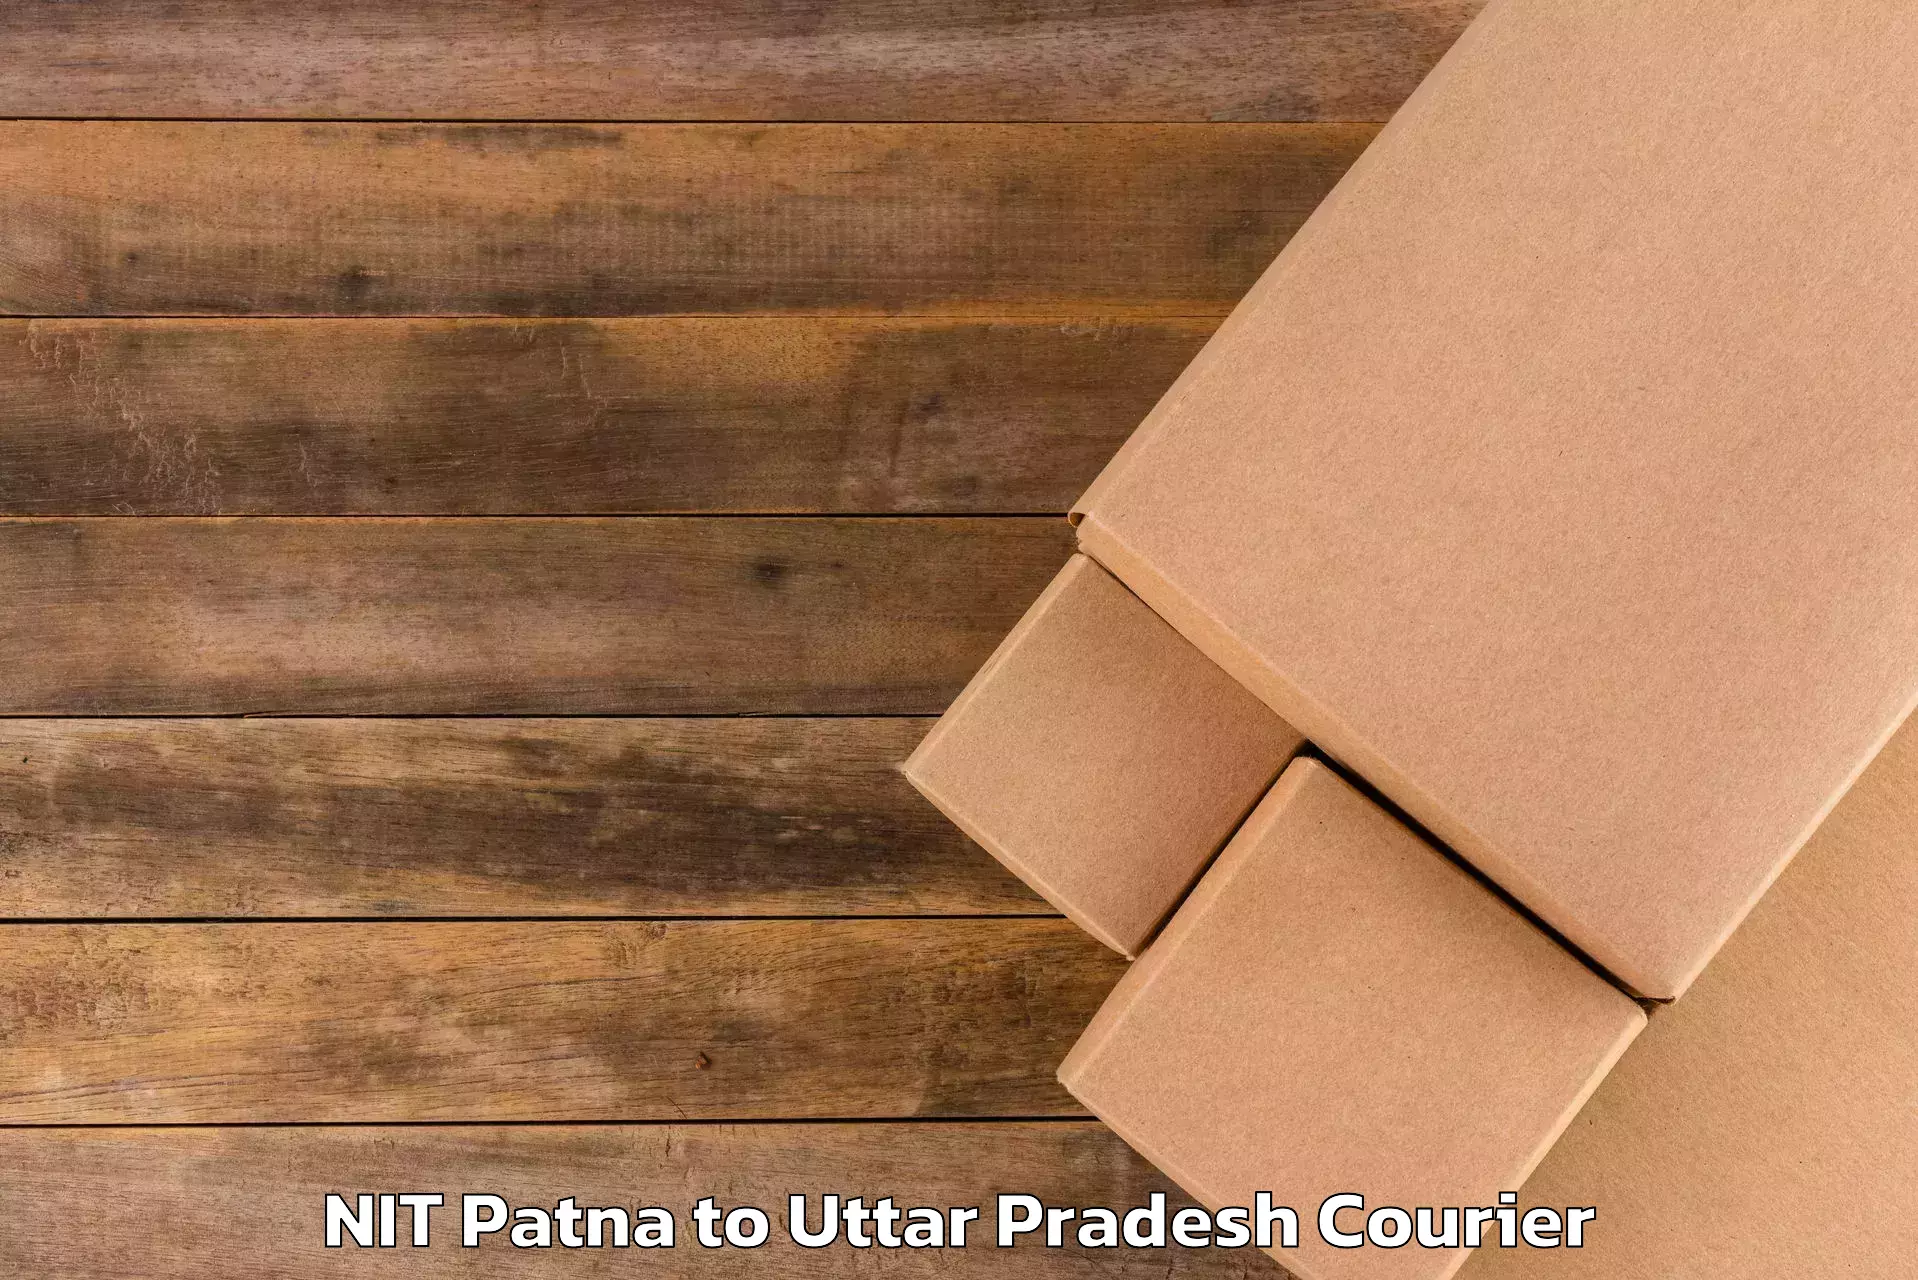 Luggage shipment processing NIT Patna to Bareilly